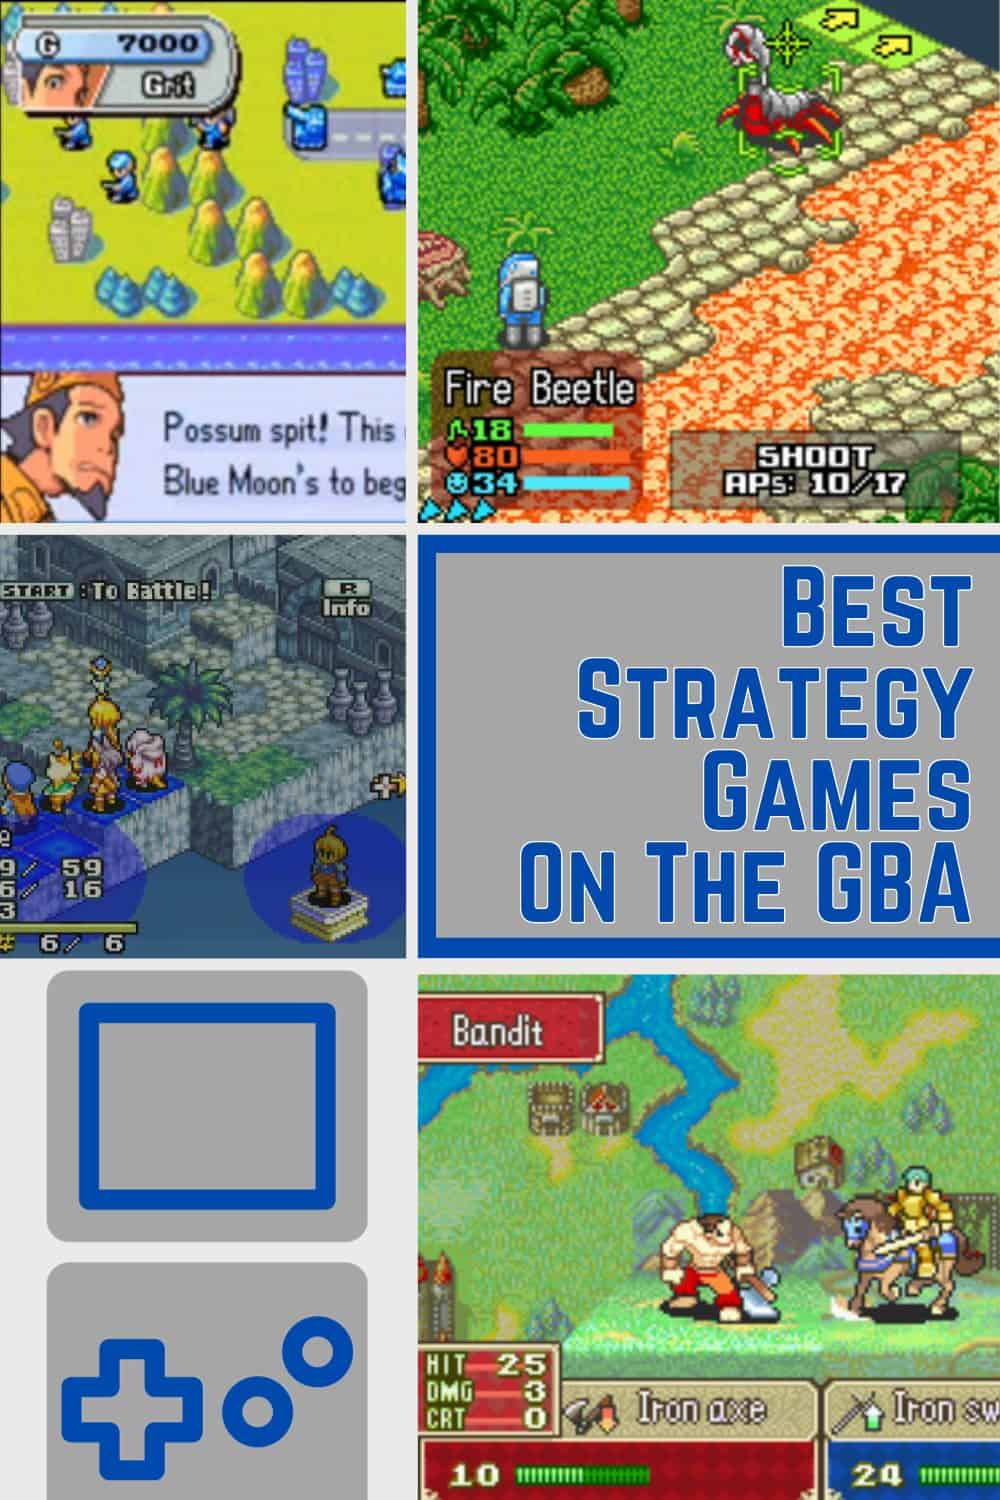 List of strategy games for the GBA